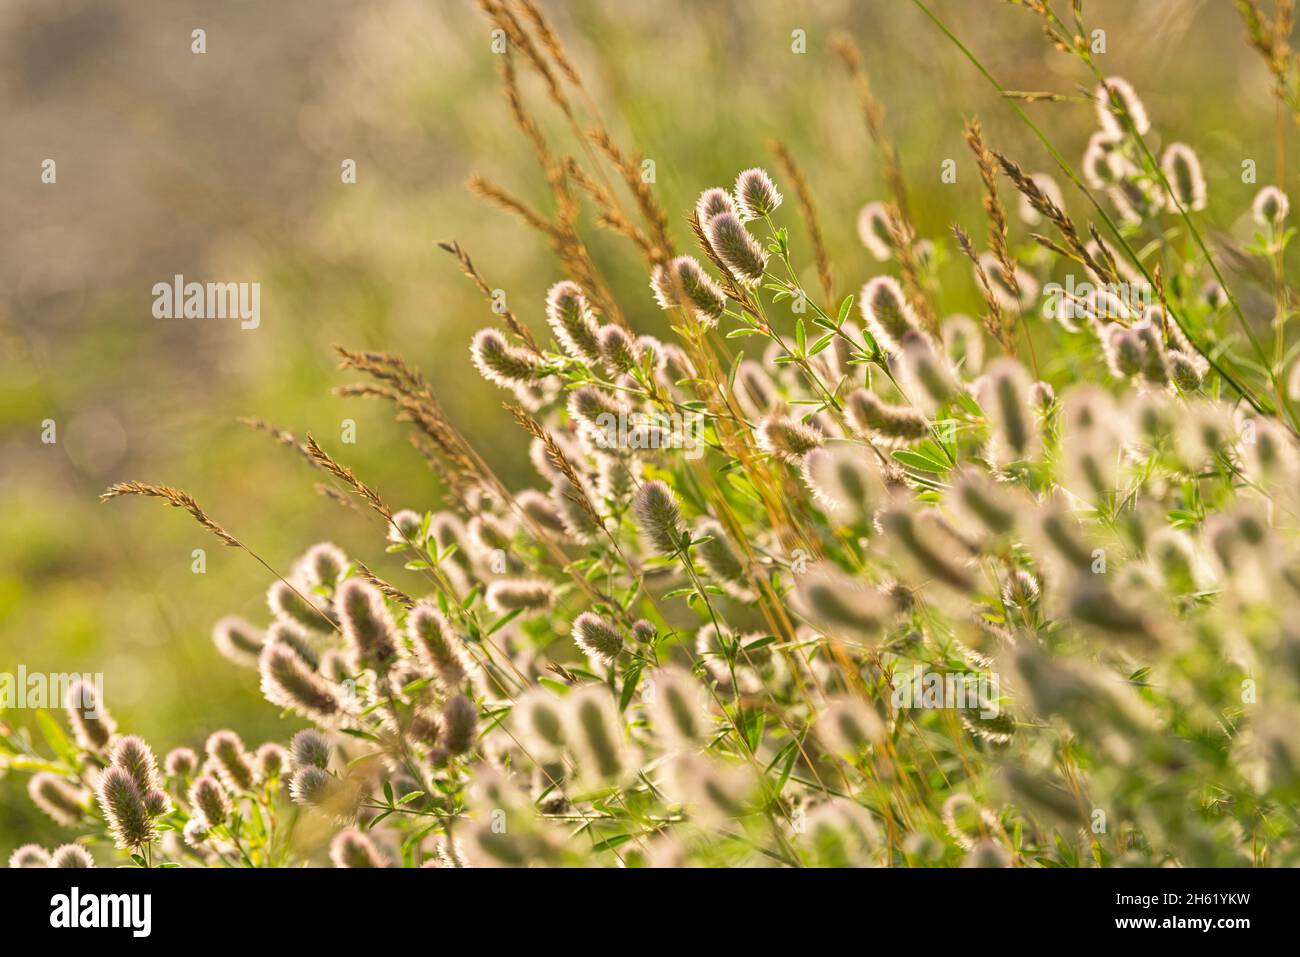 hare clover (trifolium arvense) and grasses,inflorescences glow in the backlight Stock Photo